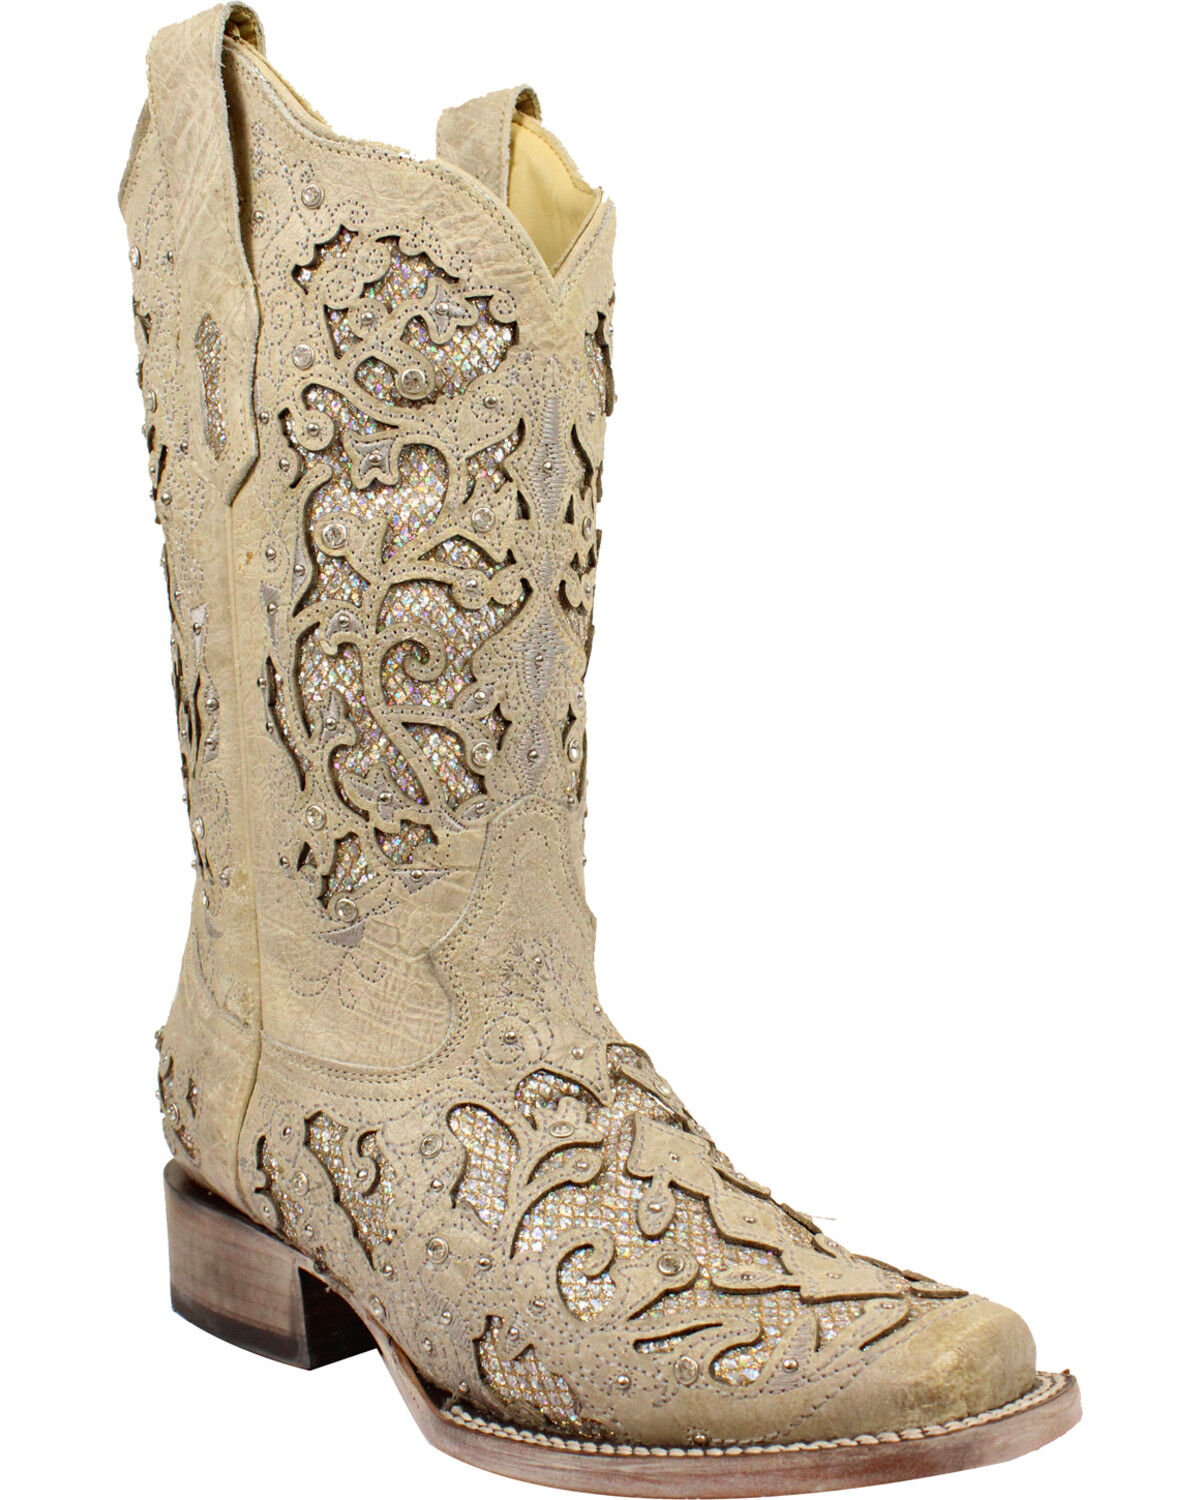 corral boots with swarovski crystals